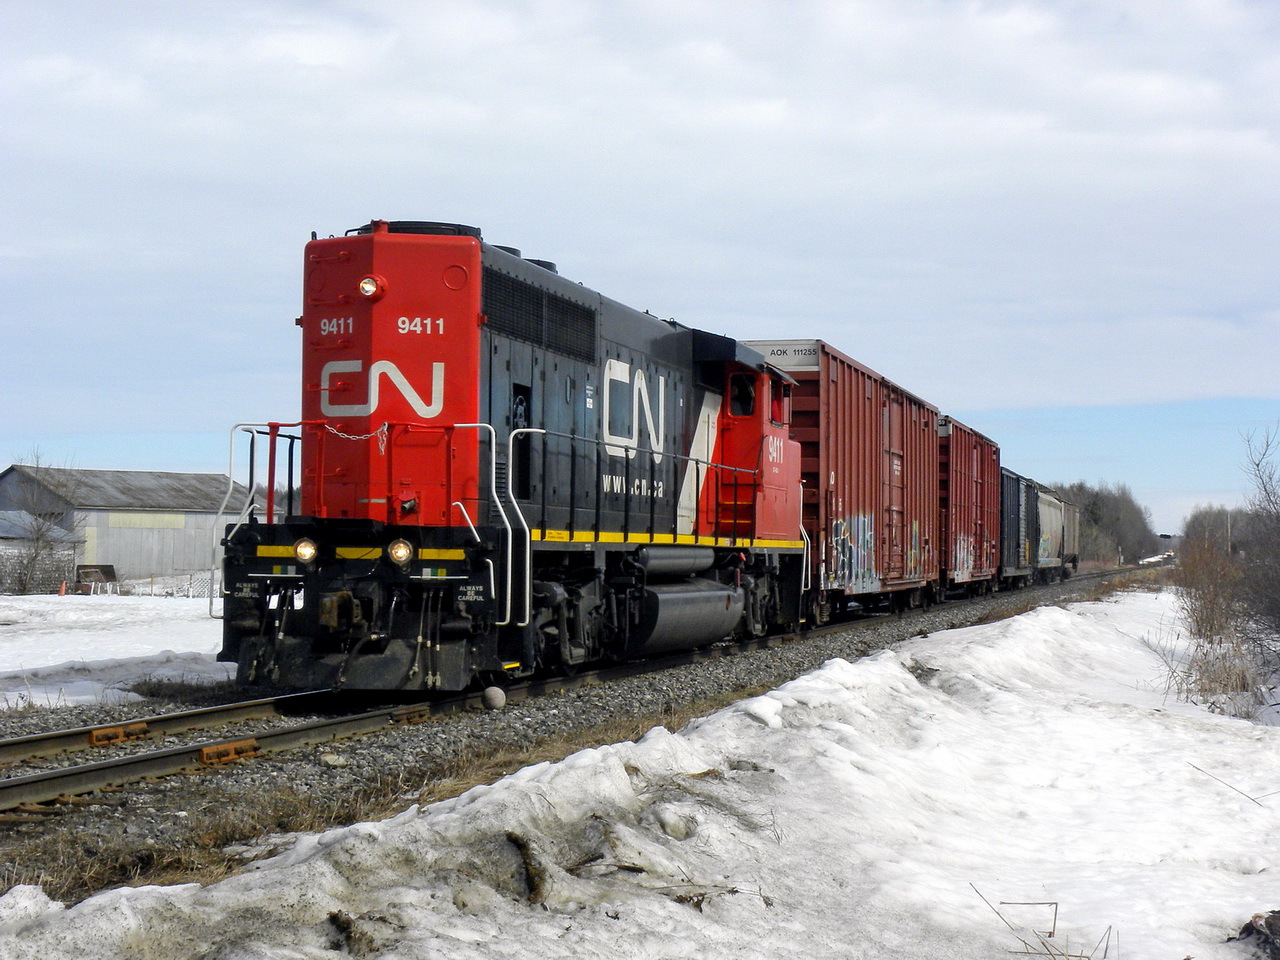 CN 514 is riding Long hood forward on its way to Bécancour.